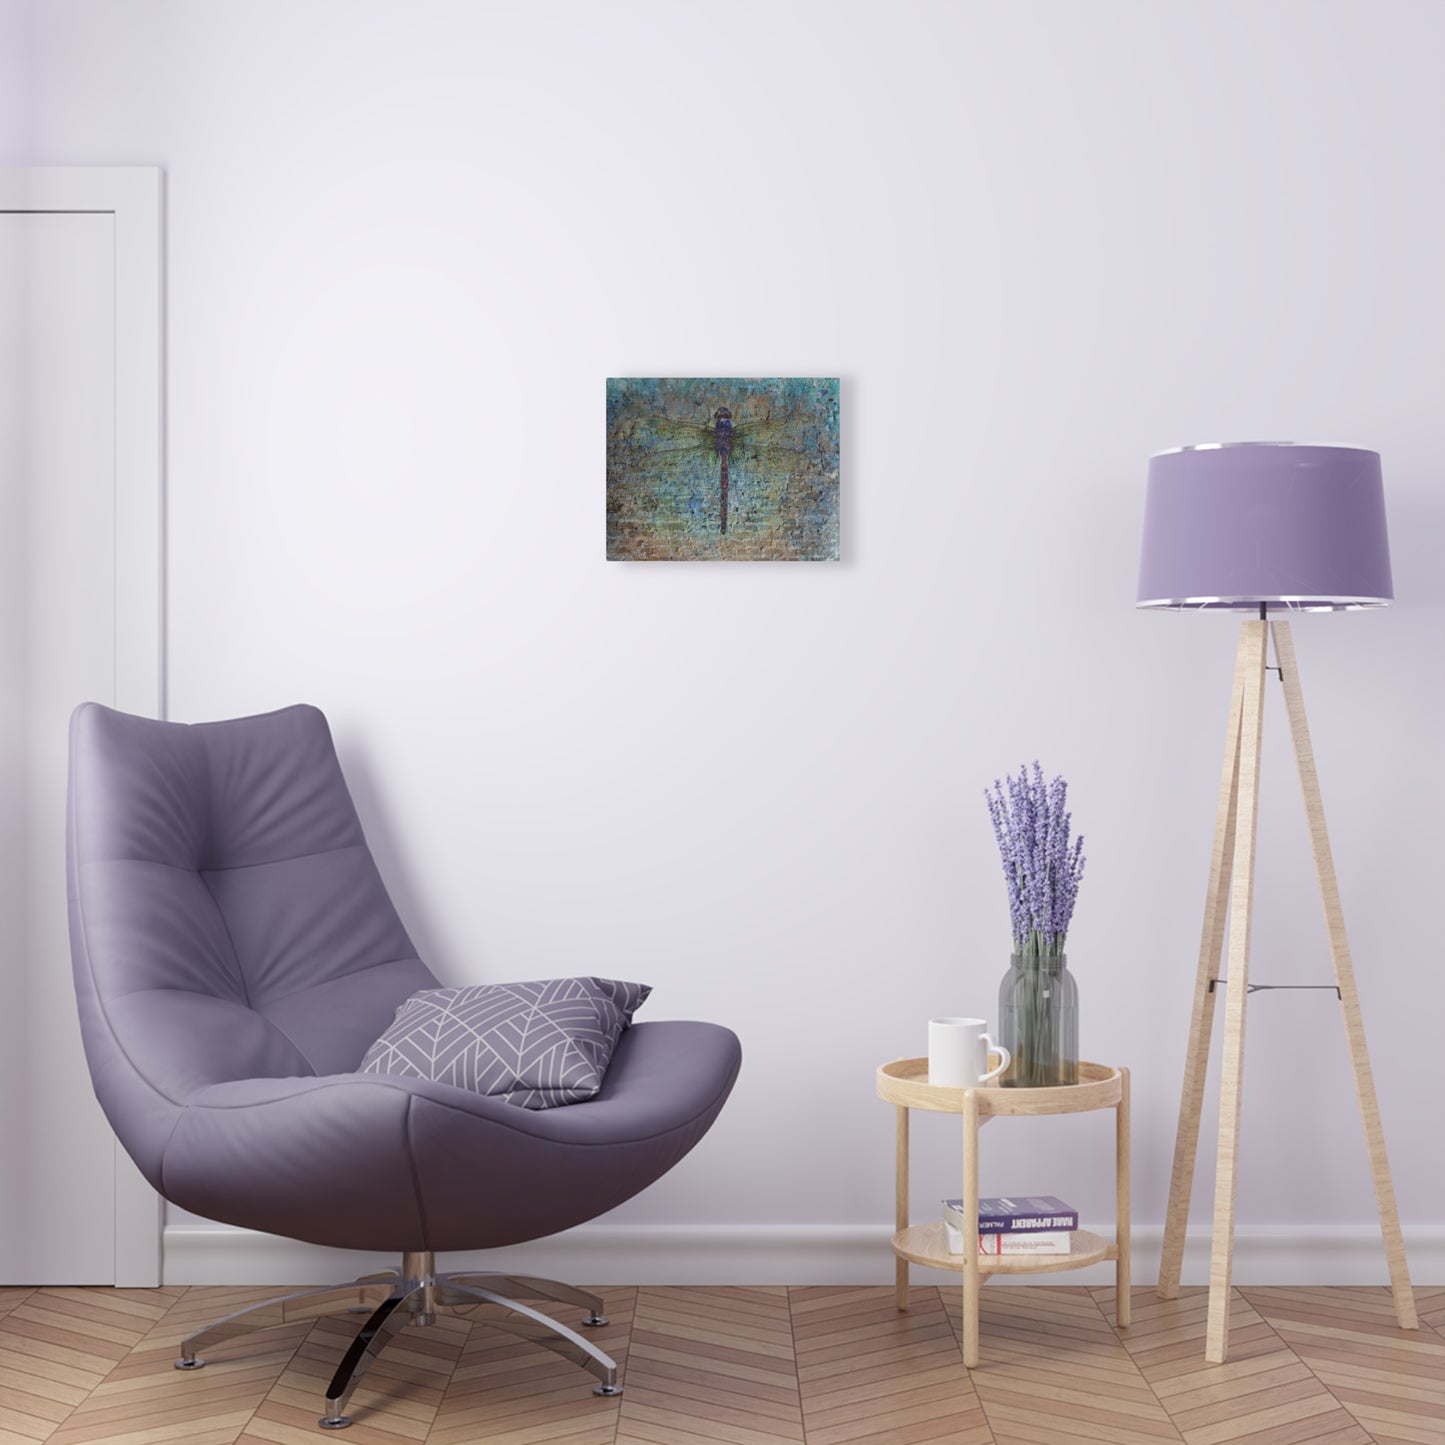 Dragonfly Themed Plexiglass Wall Art - Dragonfly on Distressed Multicolor Brick Wall Printed on a Crystal Clear Acrylic Panel